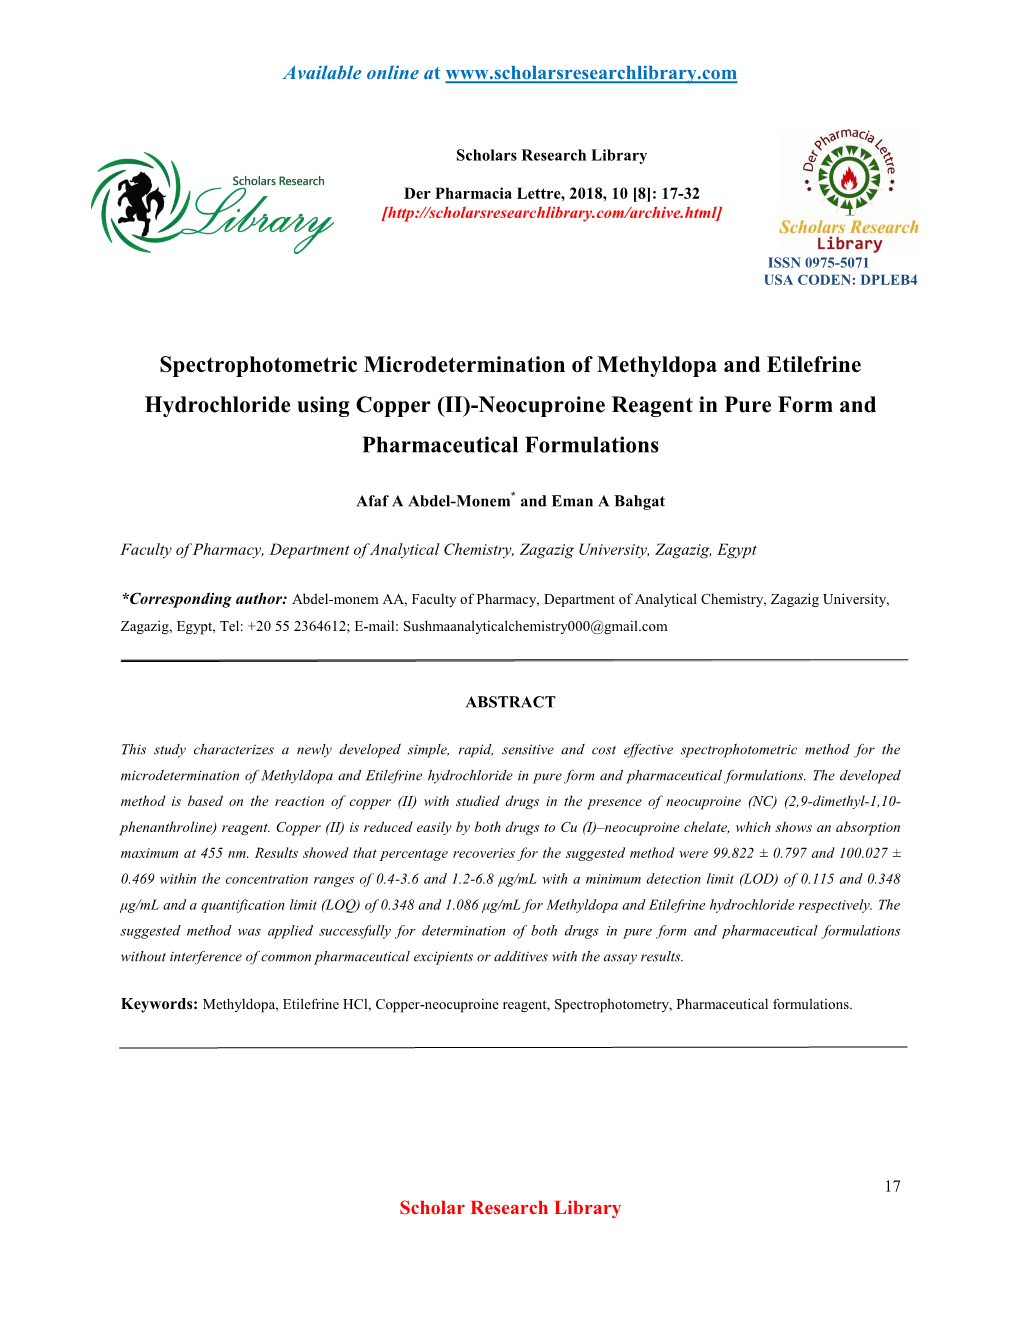 (II)-Neocuproine Reagent in Pure Form and Pharmaceutical Formulations